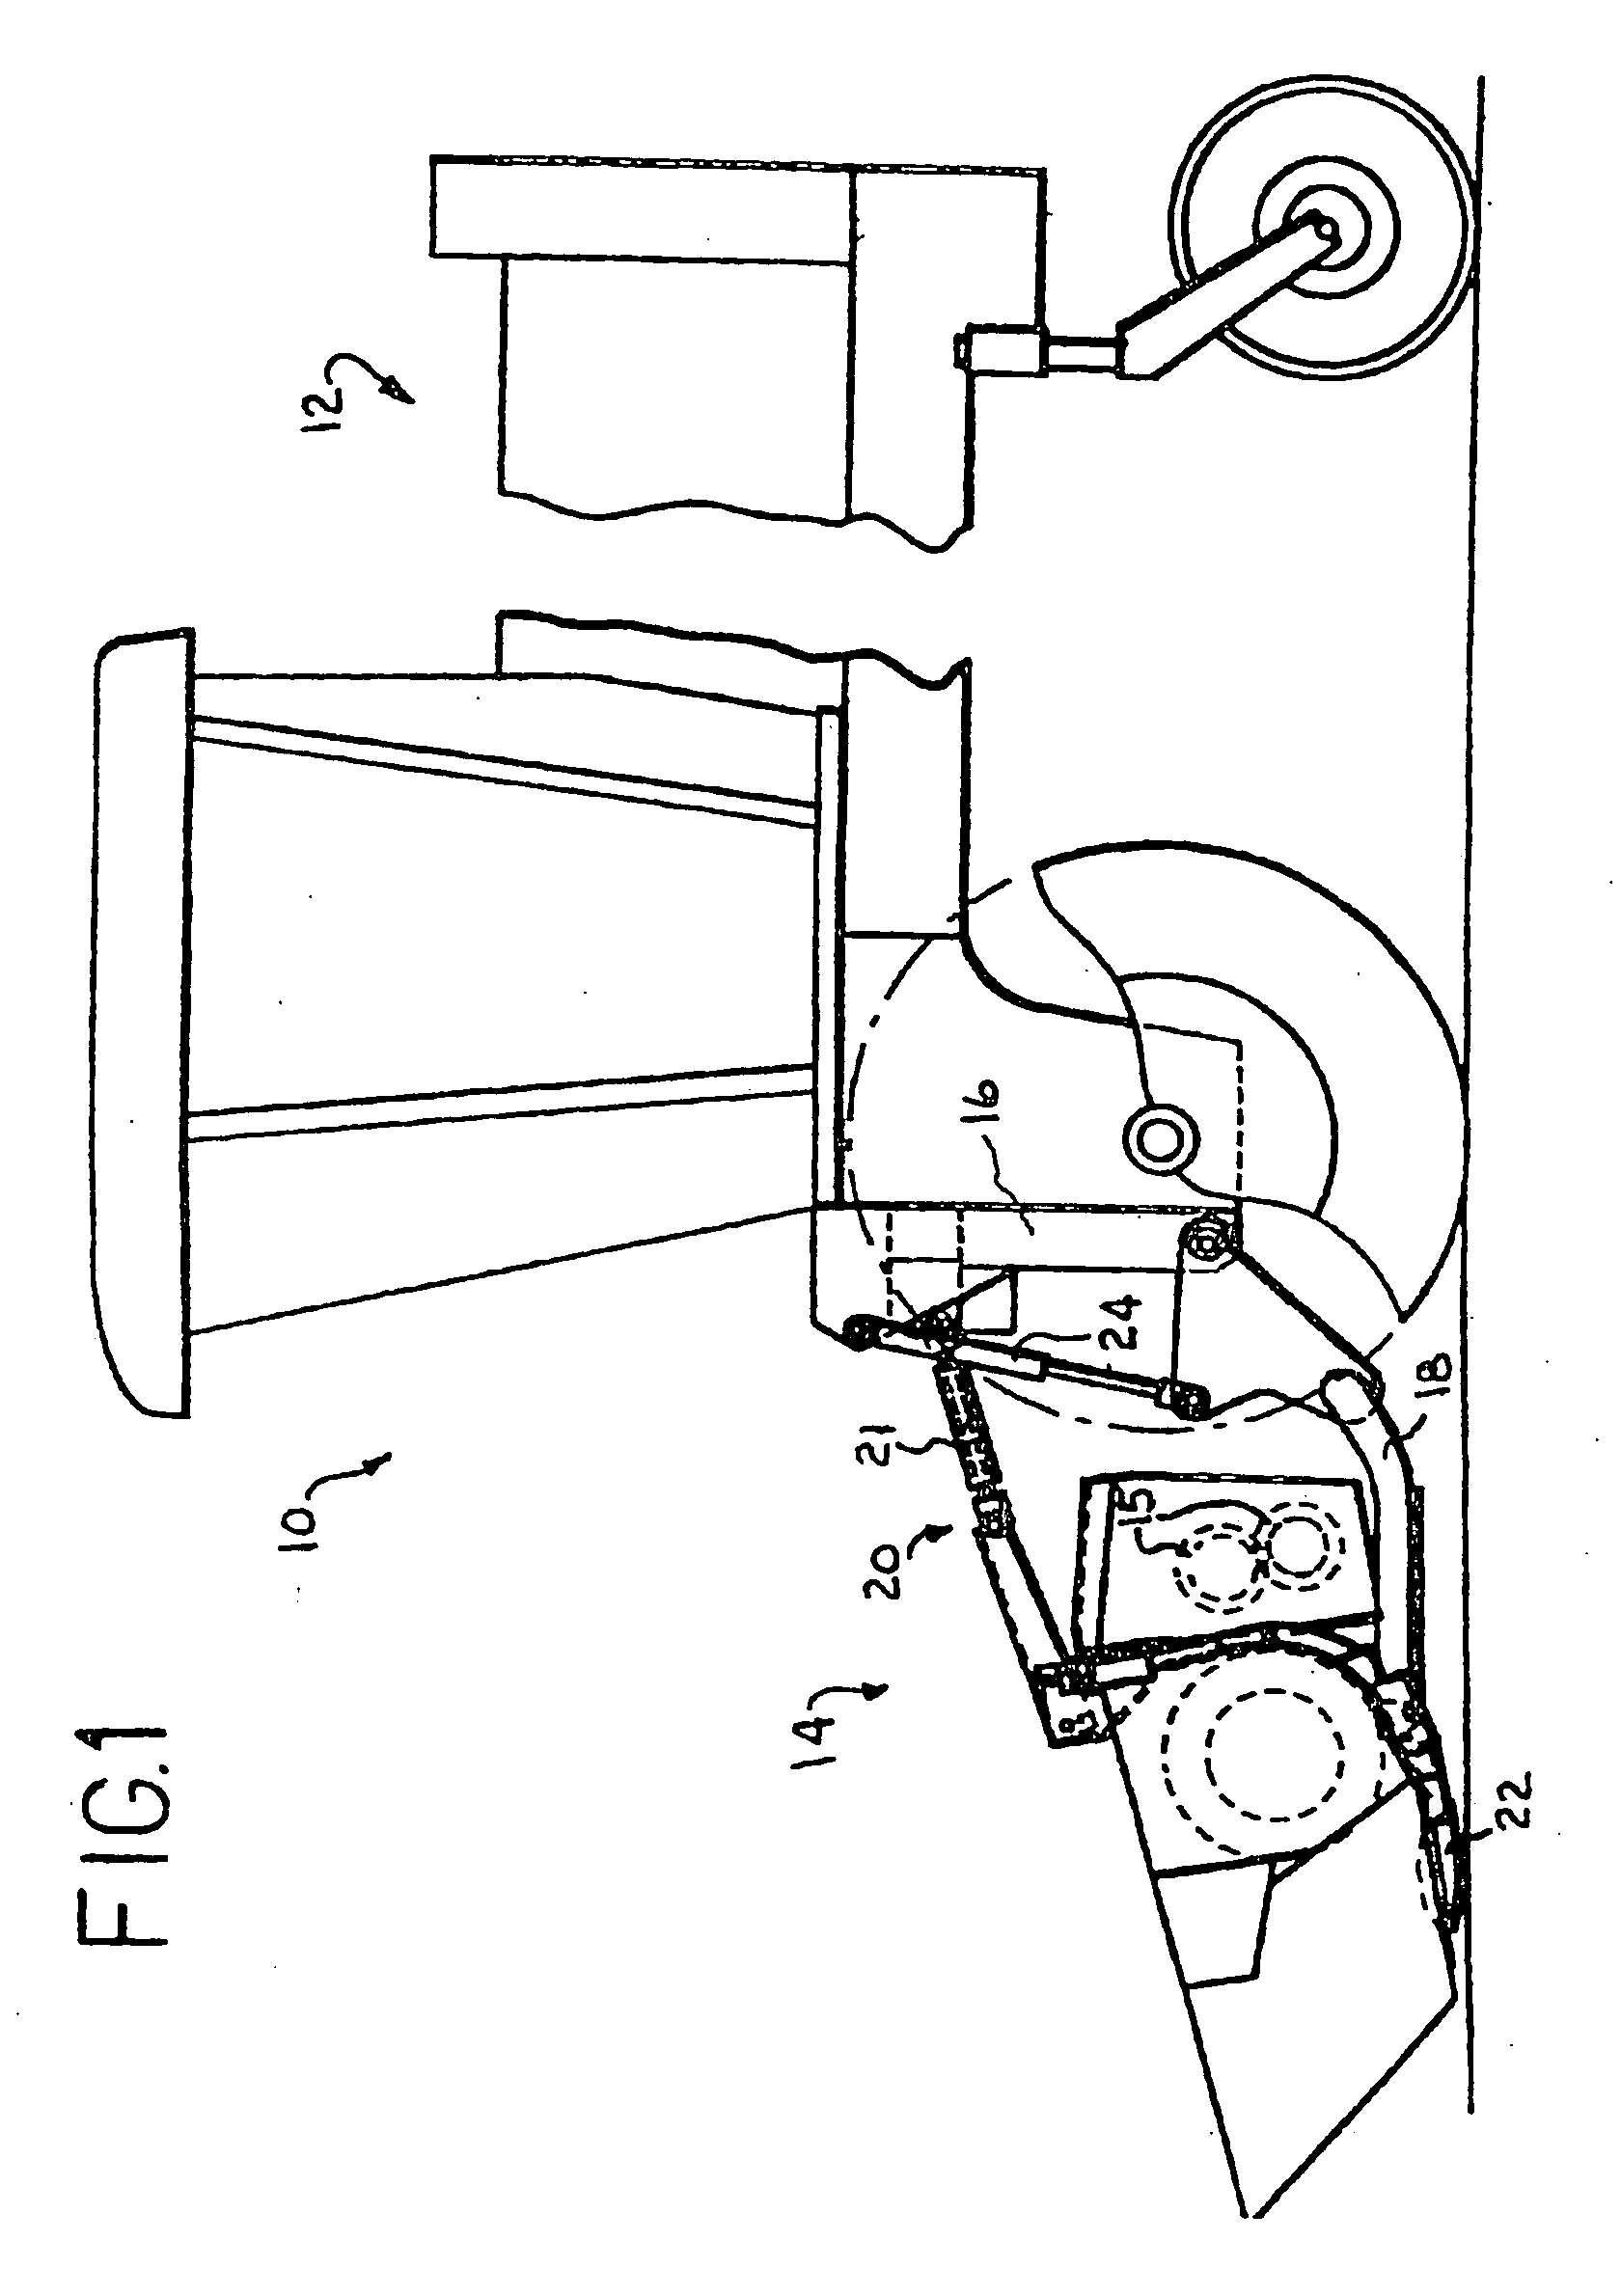 Method and apparatus to put a windrower header in the transport mode under specified conditions